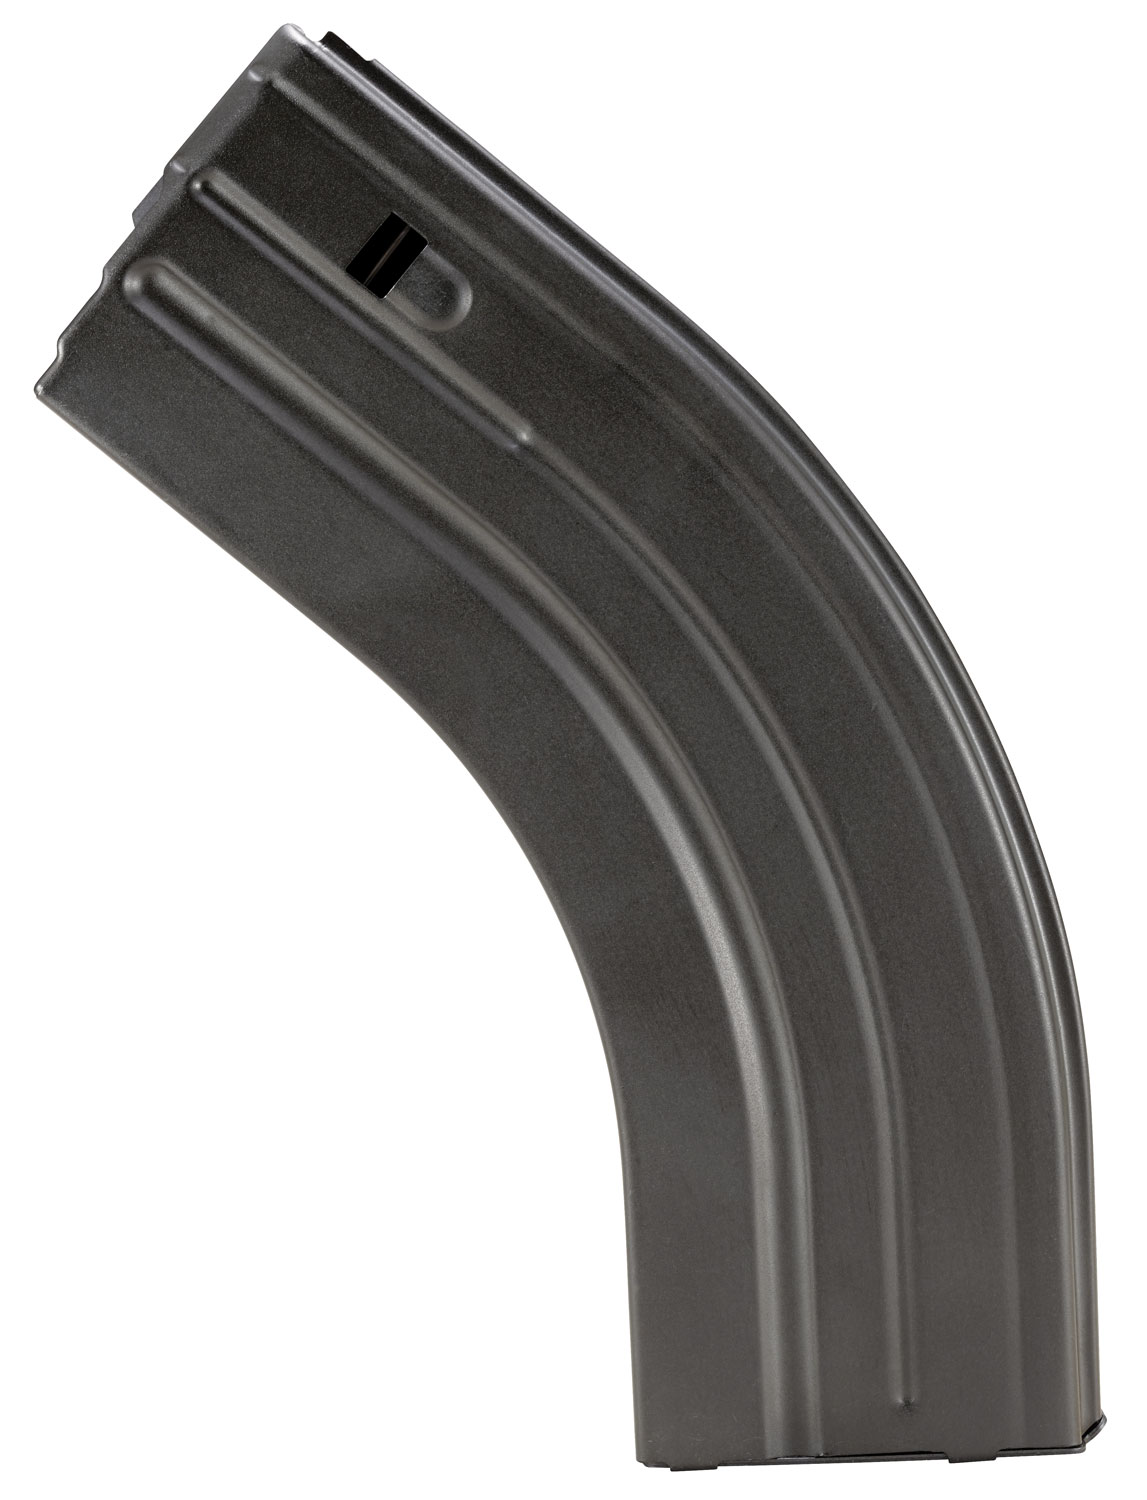 CPD MAGAZINE AR15 7.62X39 30RD BLACKENED STAINLESS STEEL